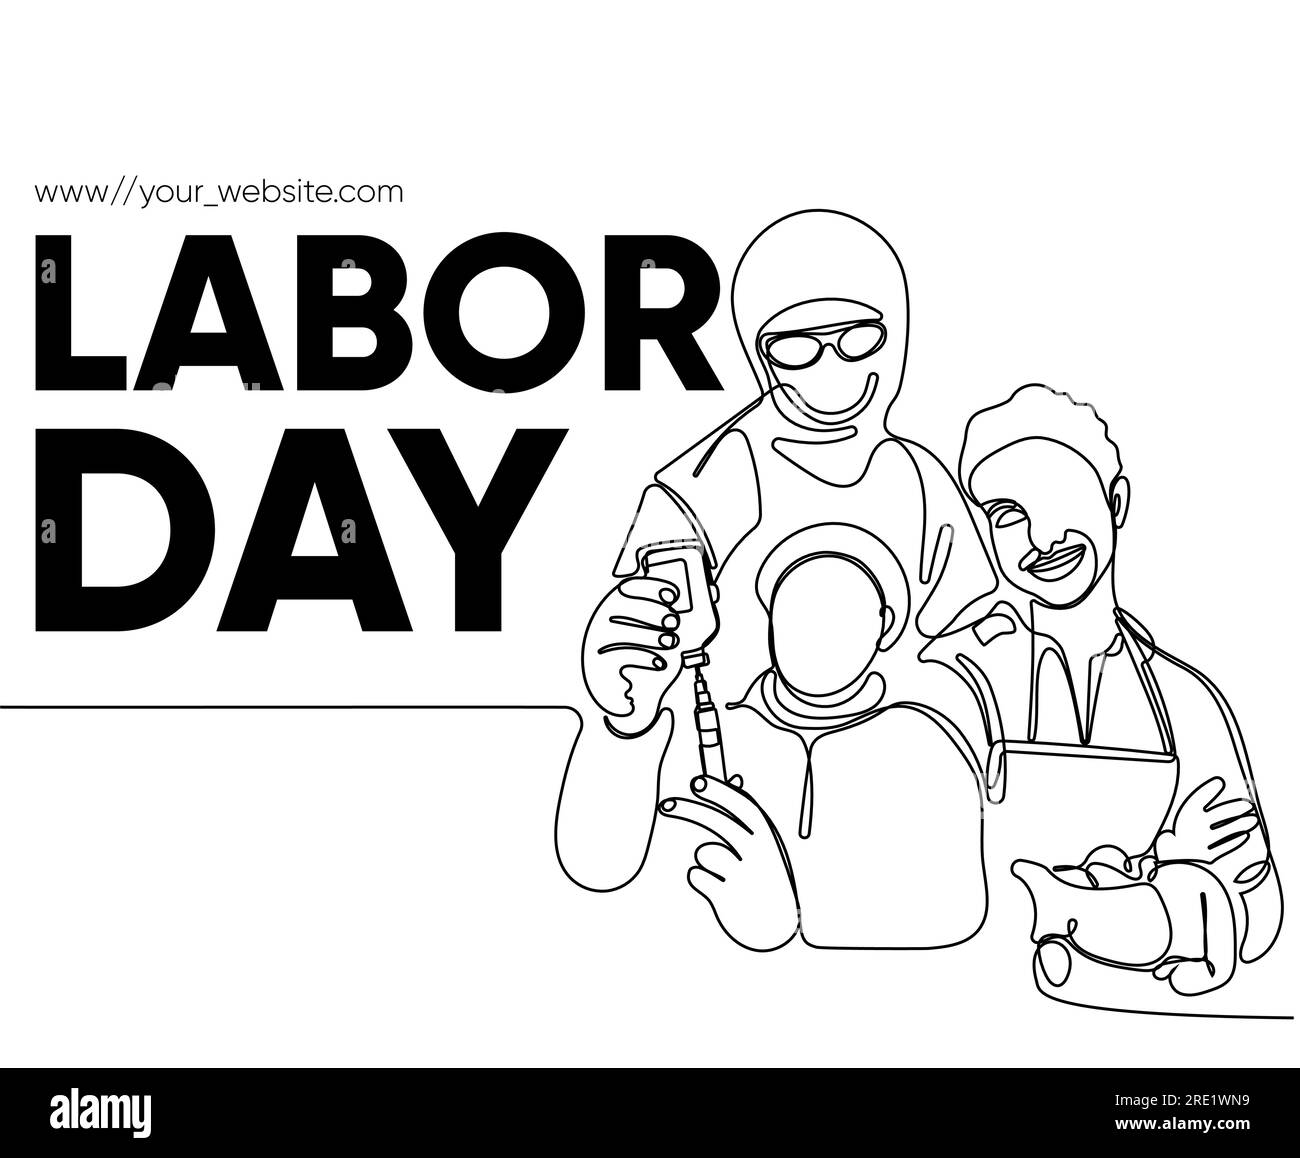 Halloween Day Coloring Pages Drawings For Labour Day-saigonsouth.com.vn